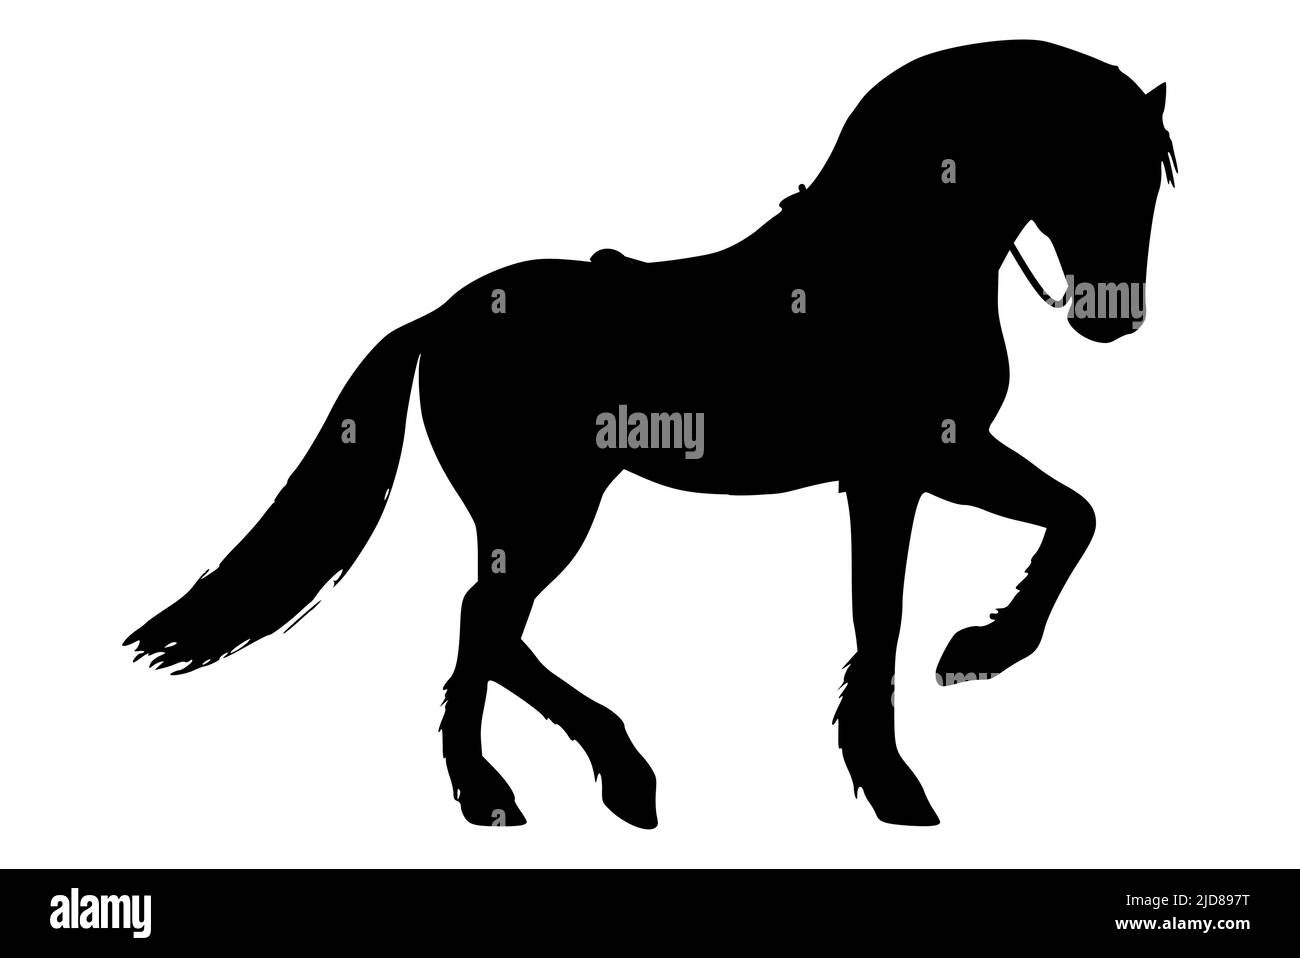 Black silhouette of a horse on white background, running Stock Vector